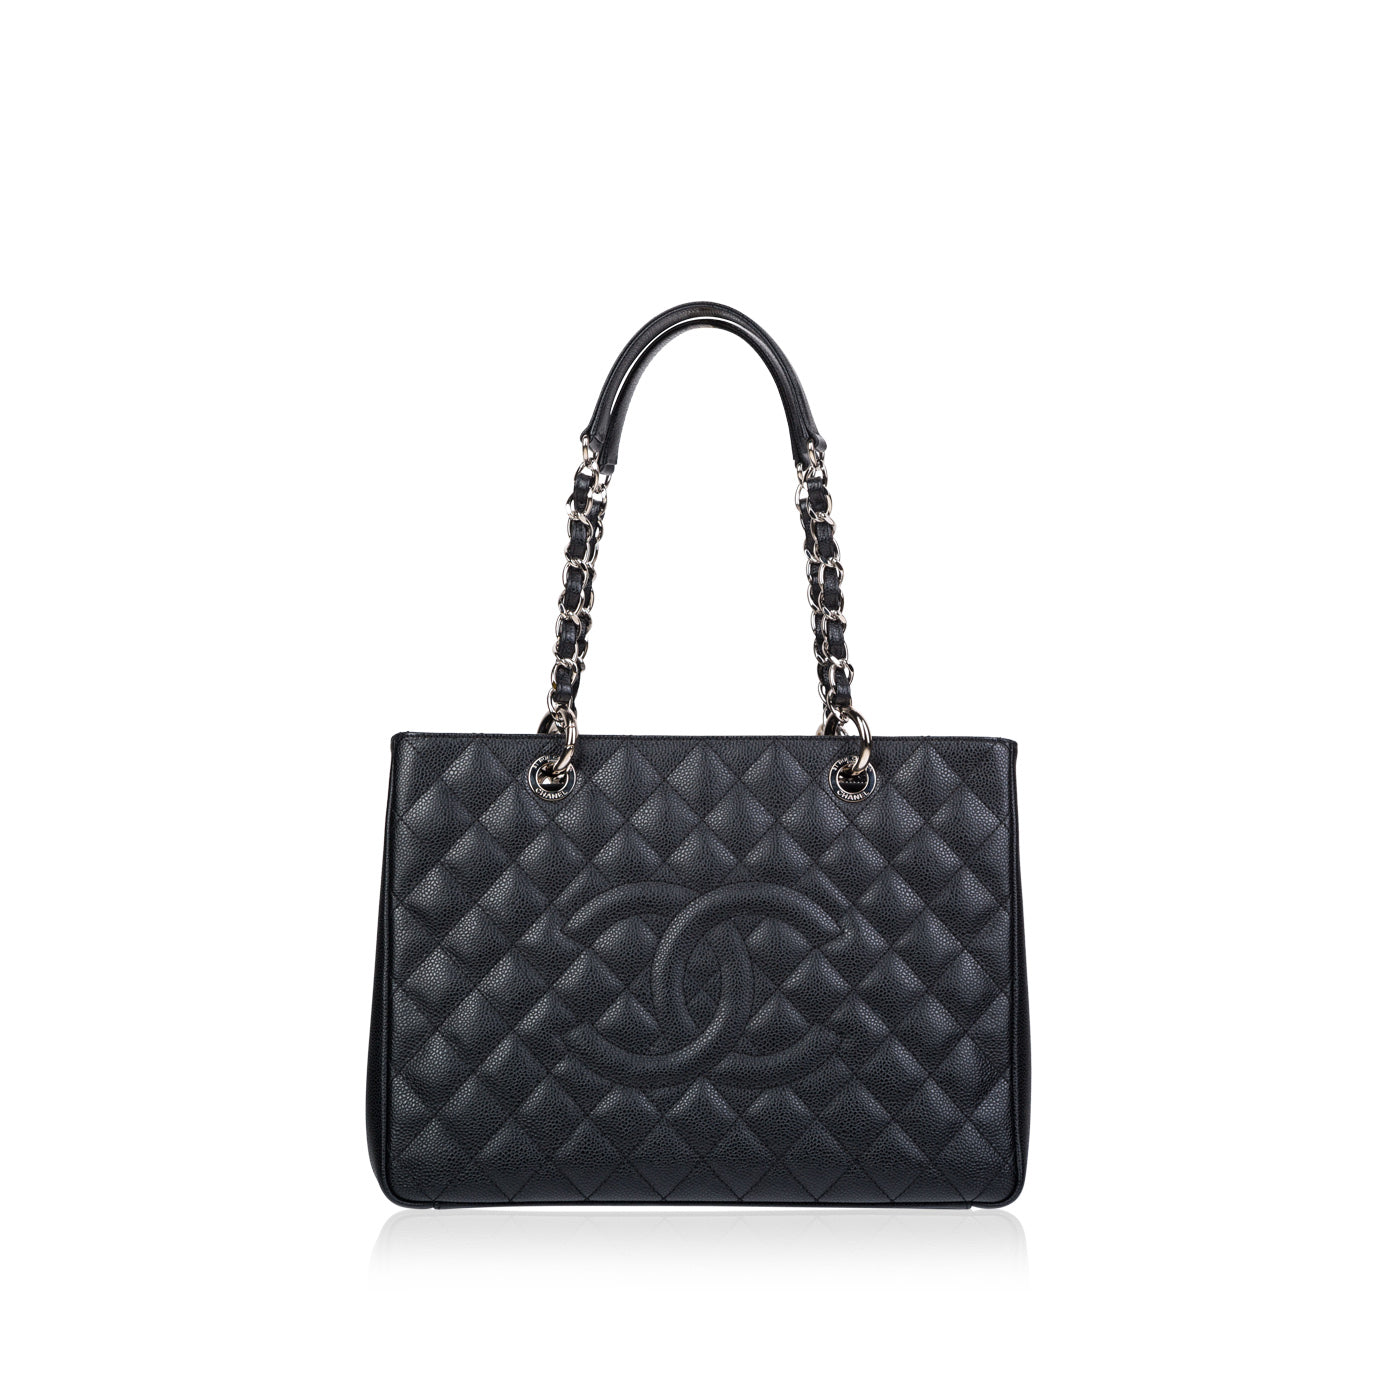 Chanel Grey Quilted Caviar Leather Coco Cocoon Large Tote Bag